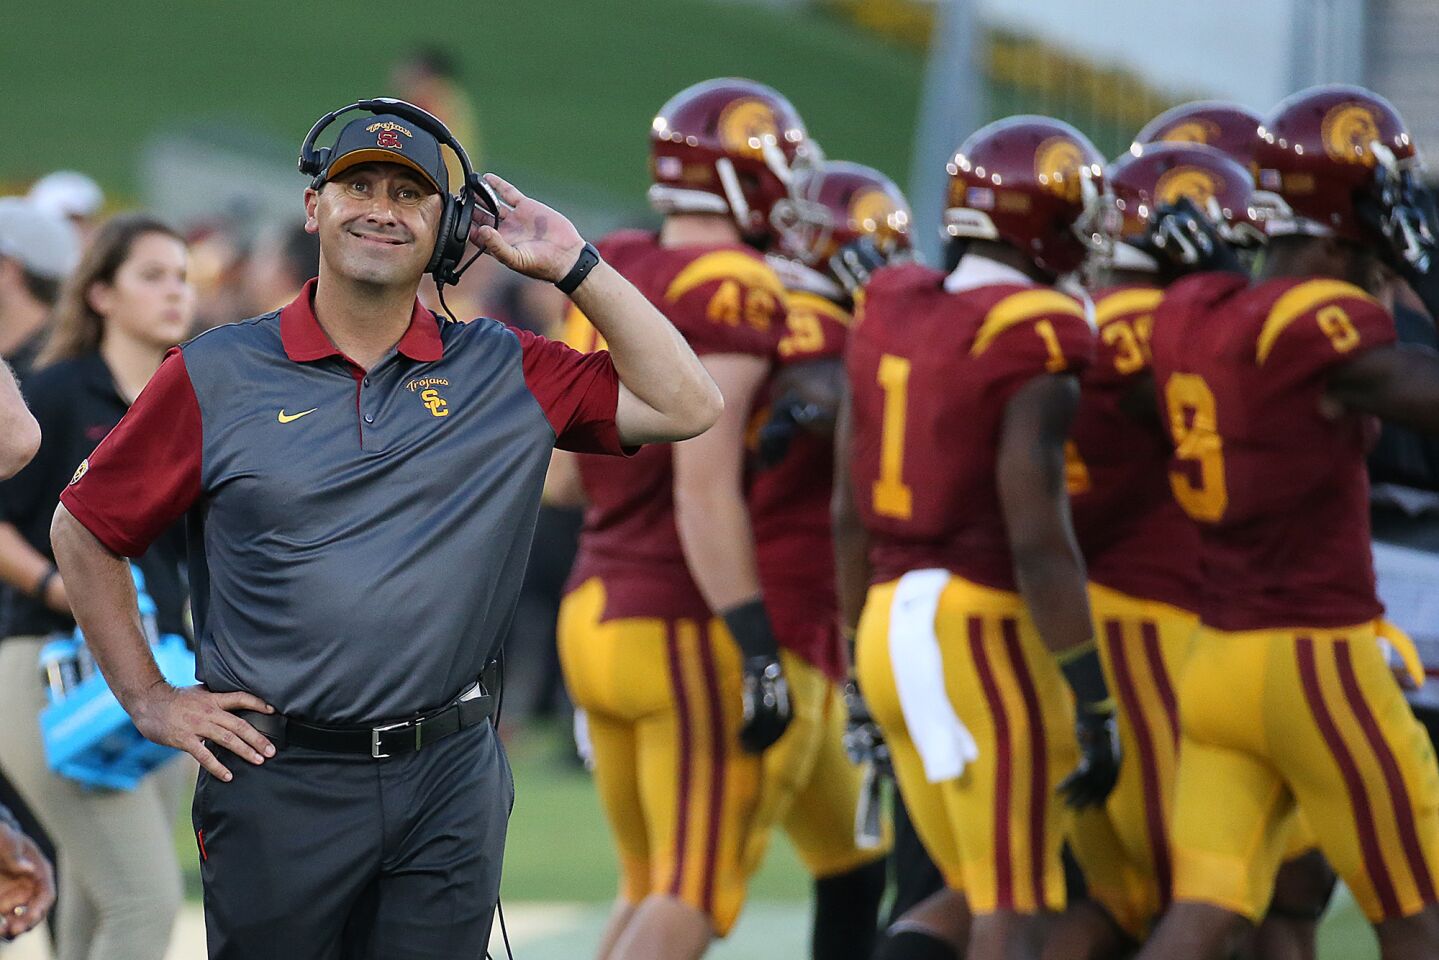 USC Coach Steve Sarkisian looks at the scoreboard after Stanford scored a touchdown on Sept. 19, 2015.